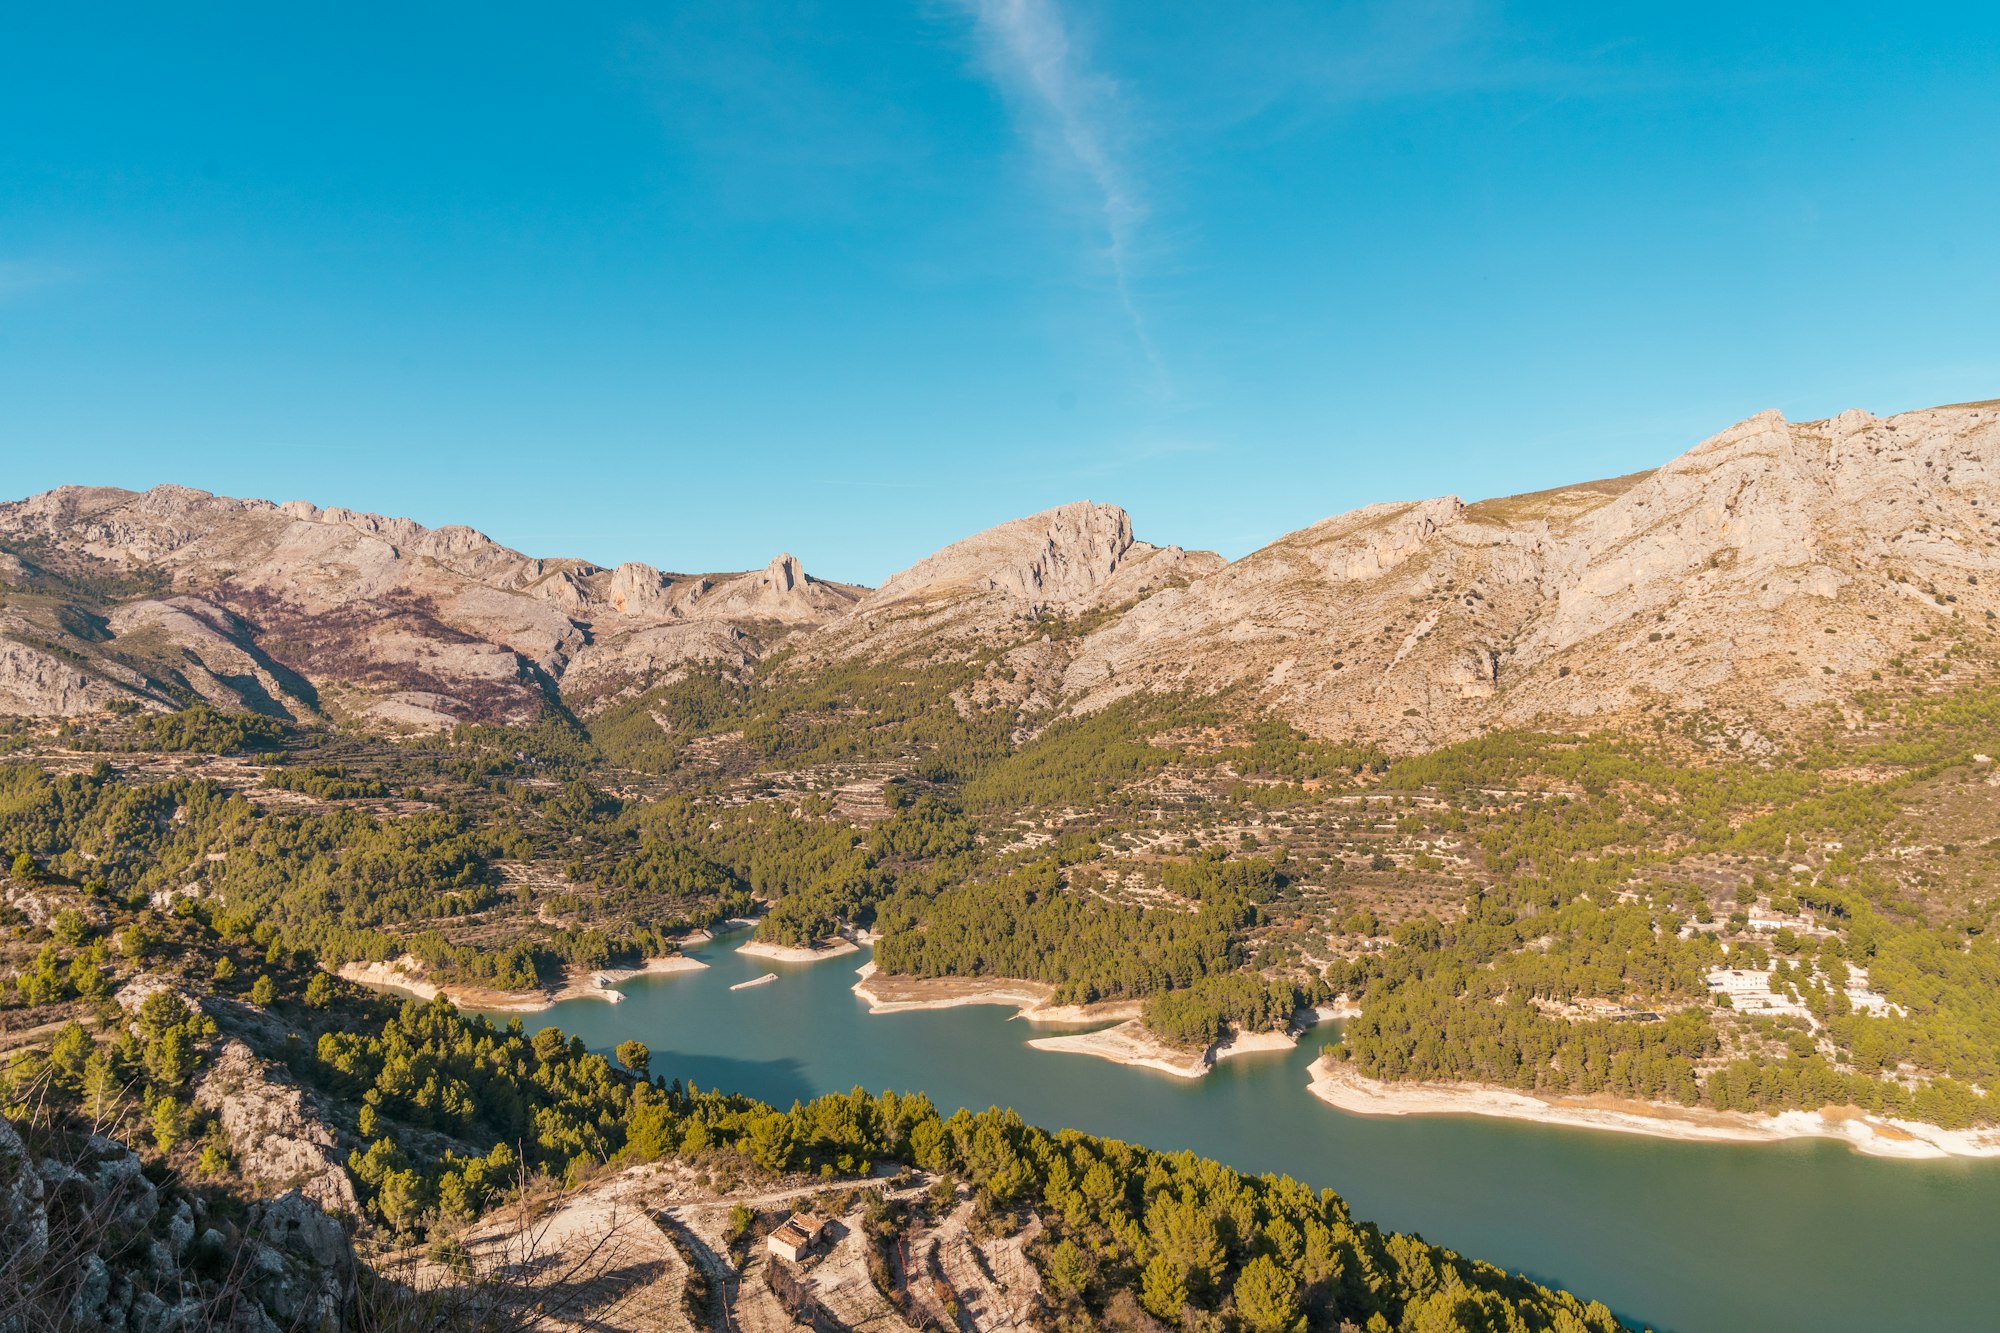 Beautiful Guadalest reservoir from Guadalest town in Alicante, Spain.